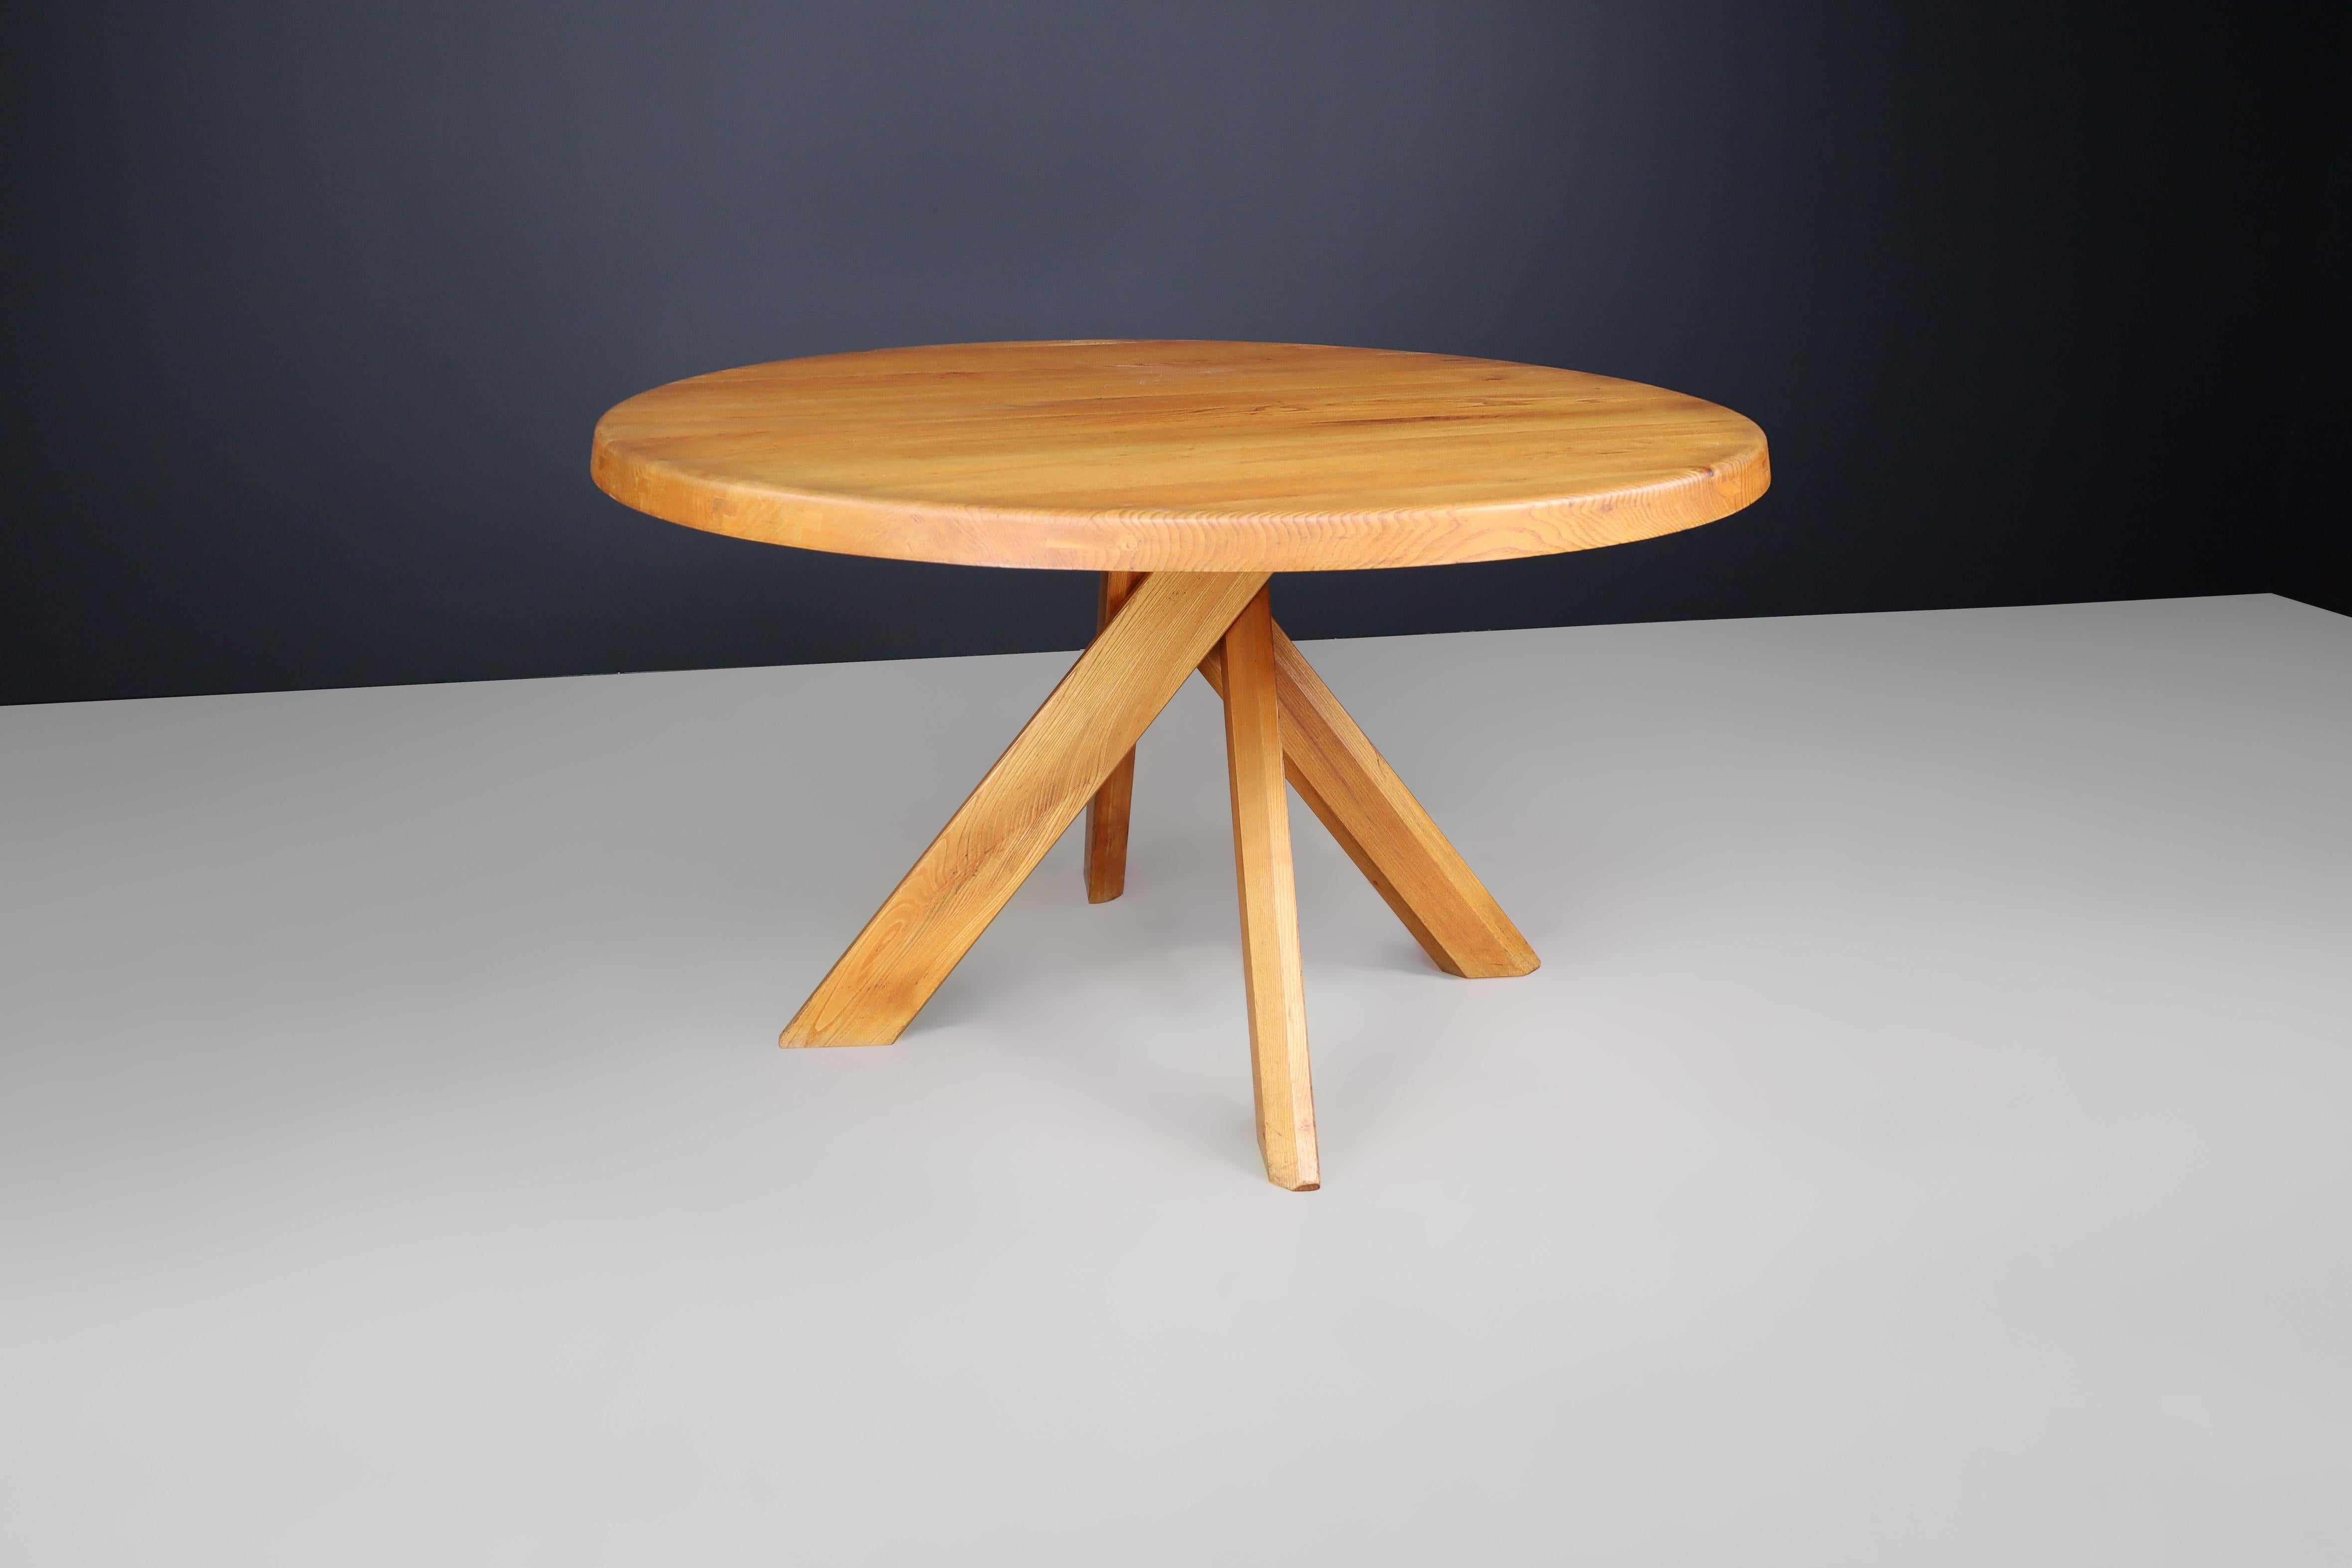 Pierre Chapo 'T21C' Sfax Round Dining Table made of Solid Elm, France 1969 For Sale 1